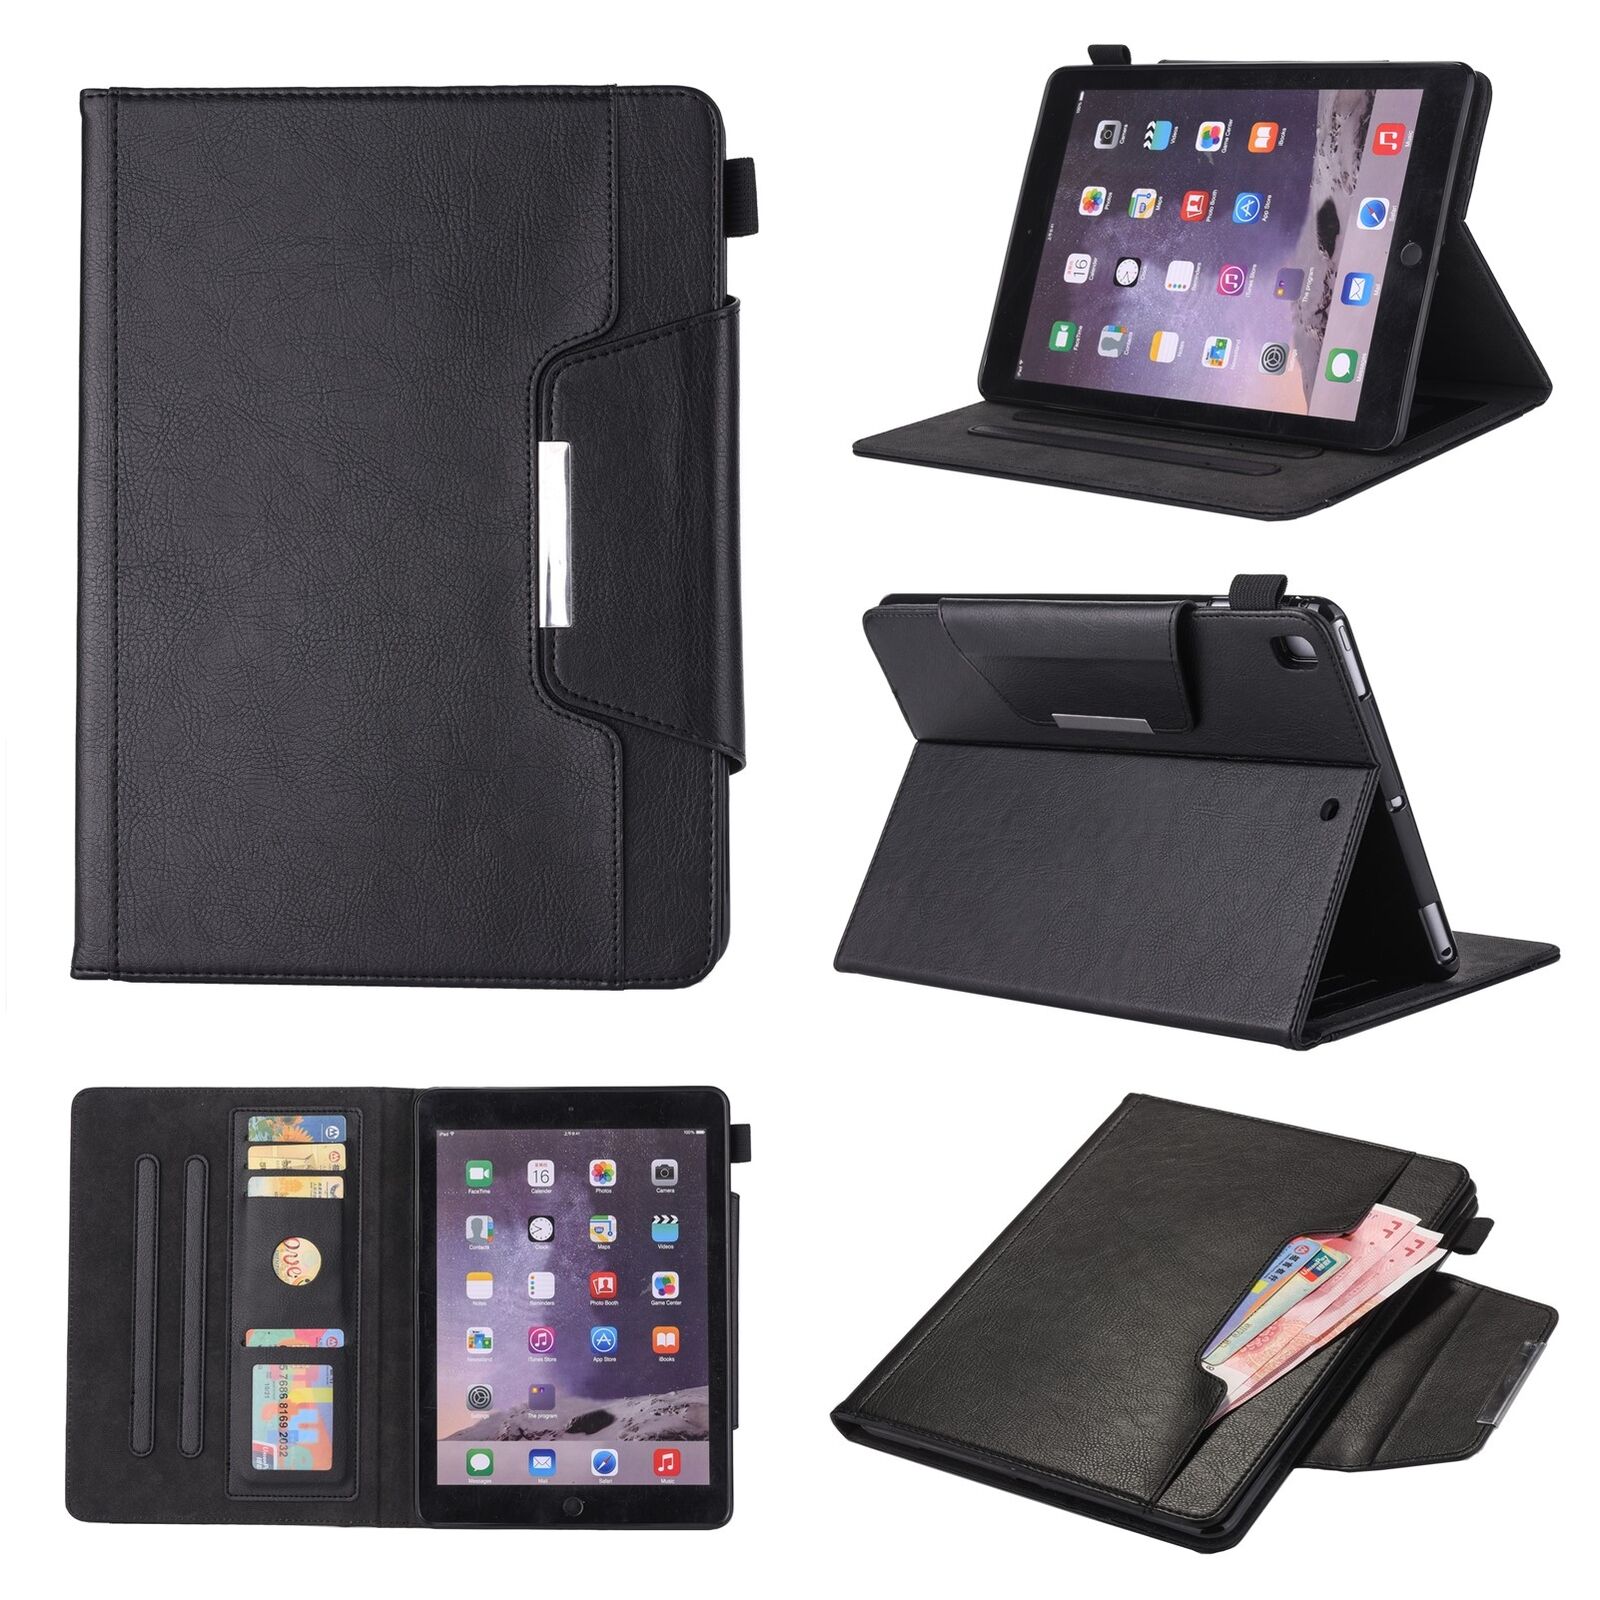 Case For iPad Pro 11 2018/2020/2021 Air 4/5 10.9 Leather Smart Protective Cover